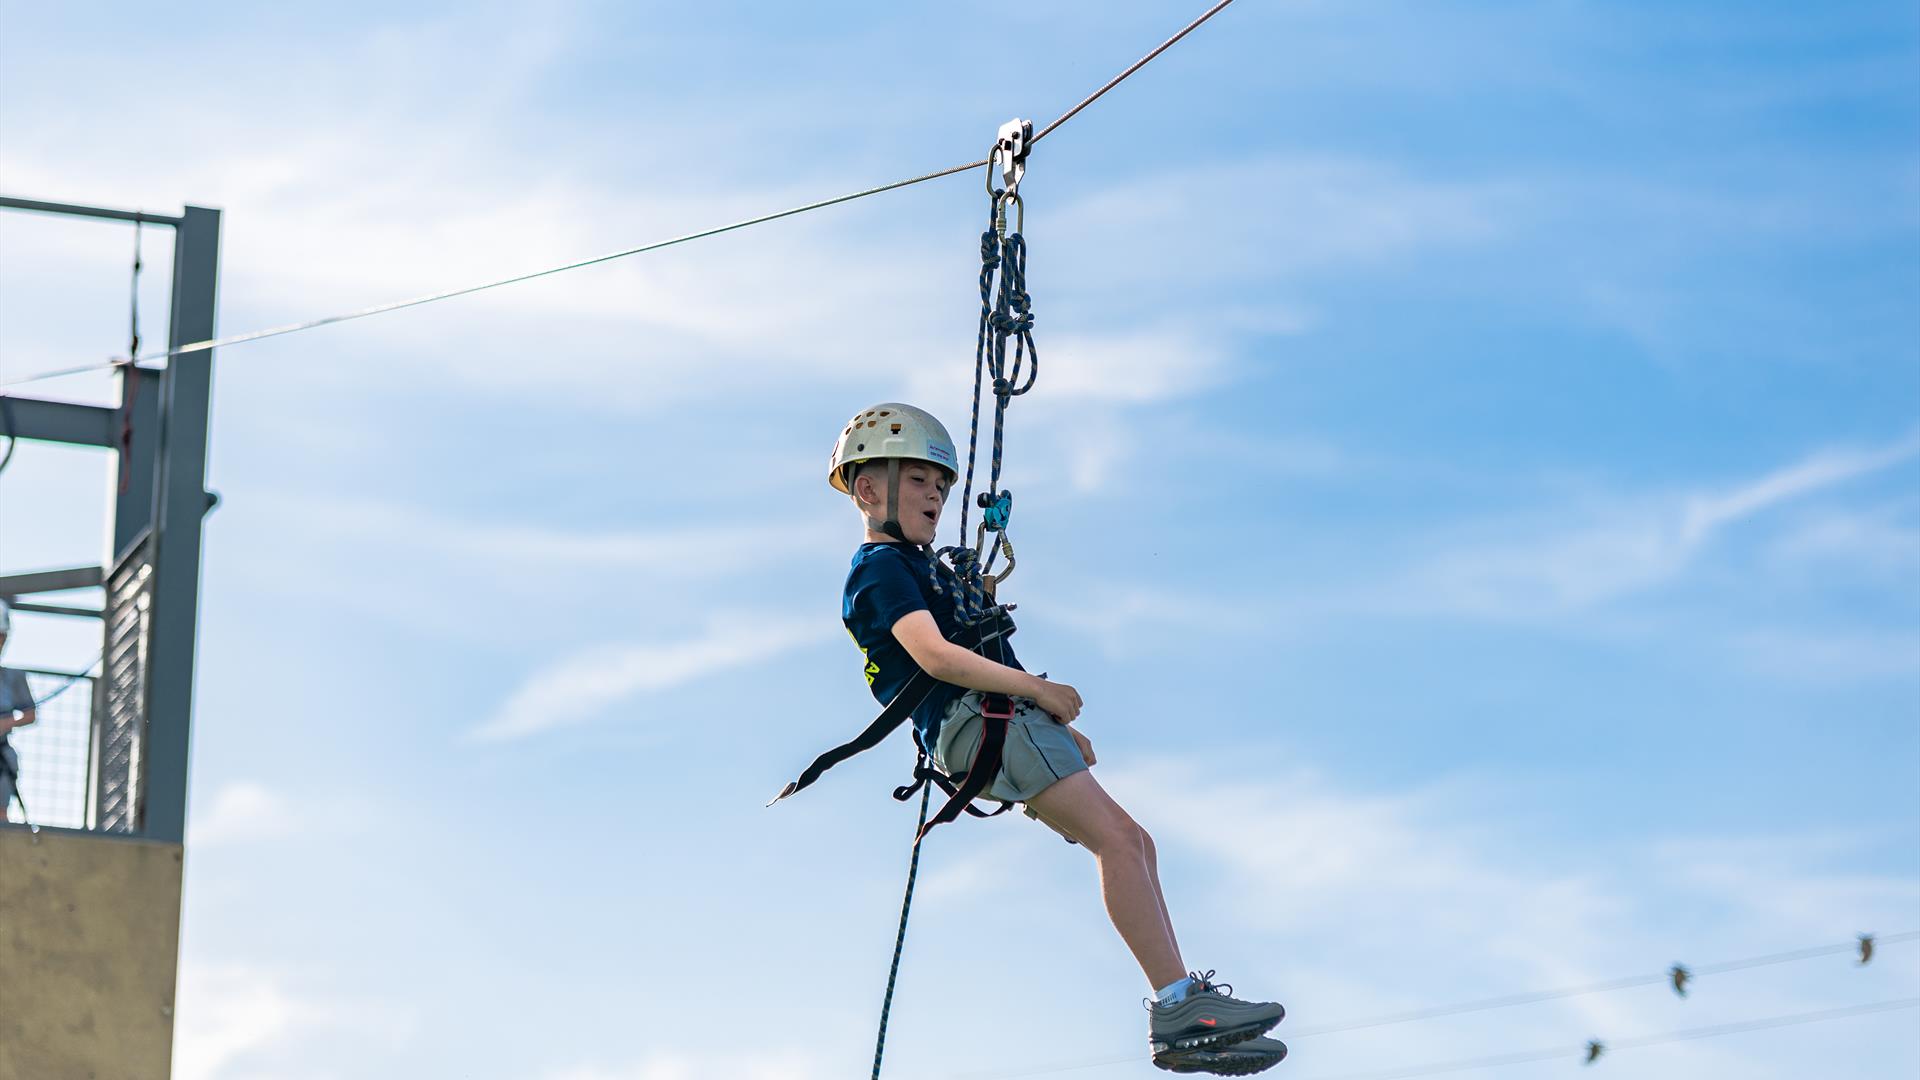 A boy in a blue outfit and white helmet harnessed to a zipline